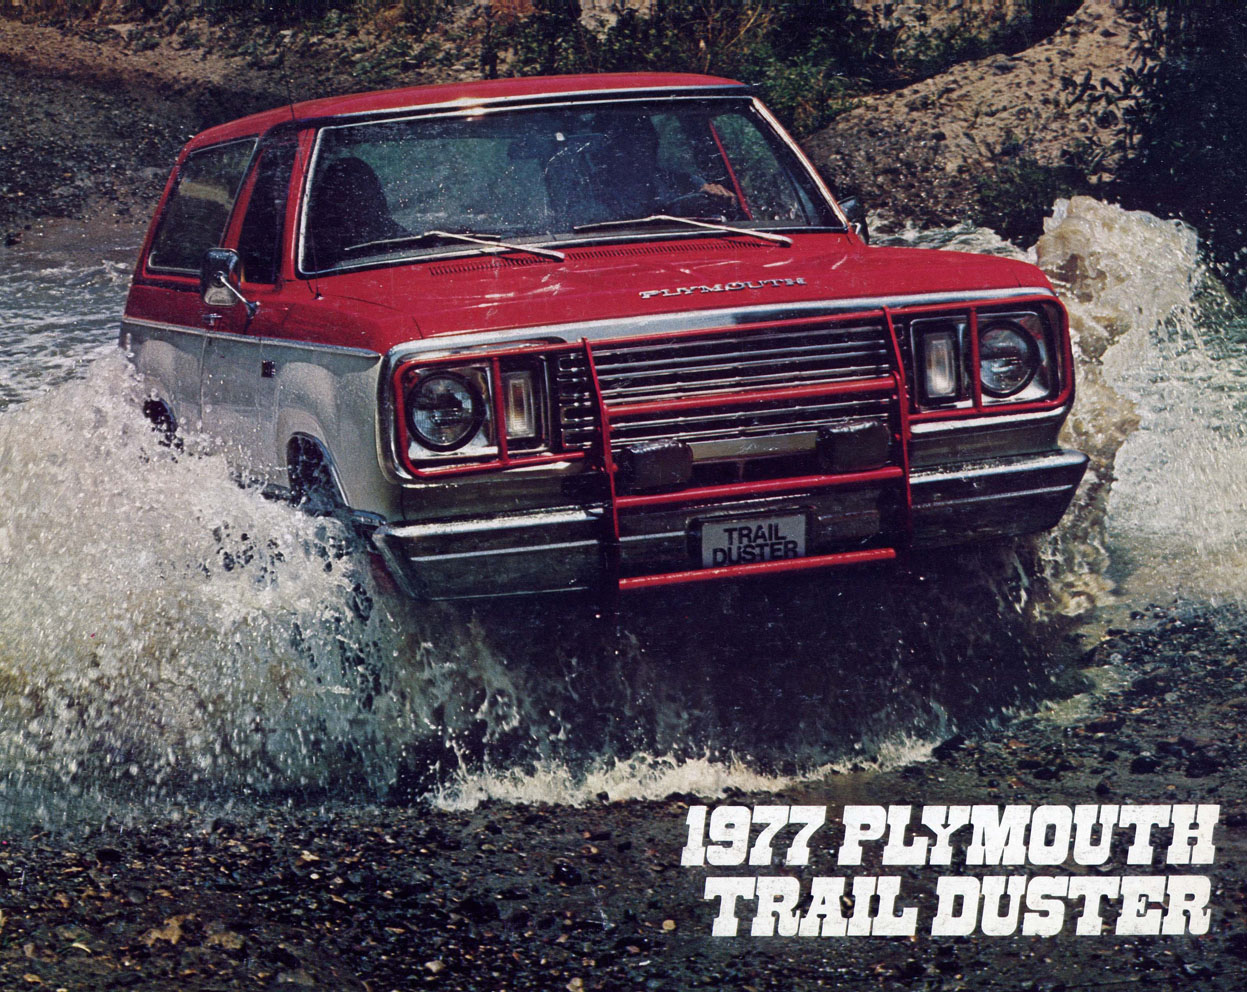 Plymouth Trail Duster #1